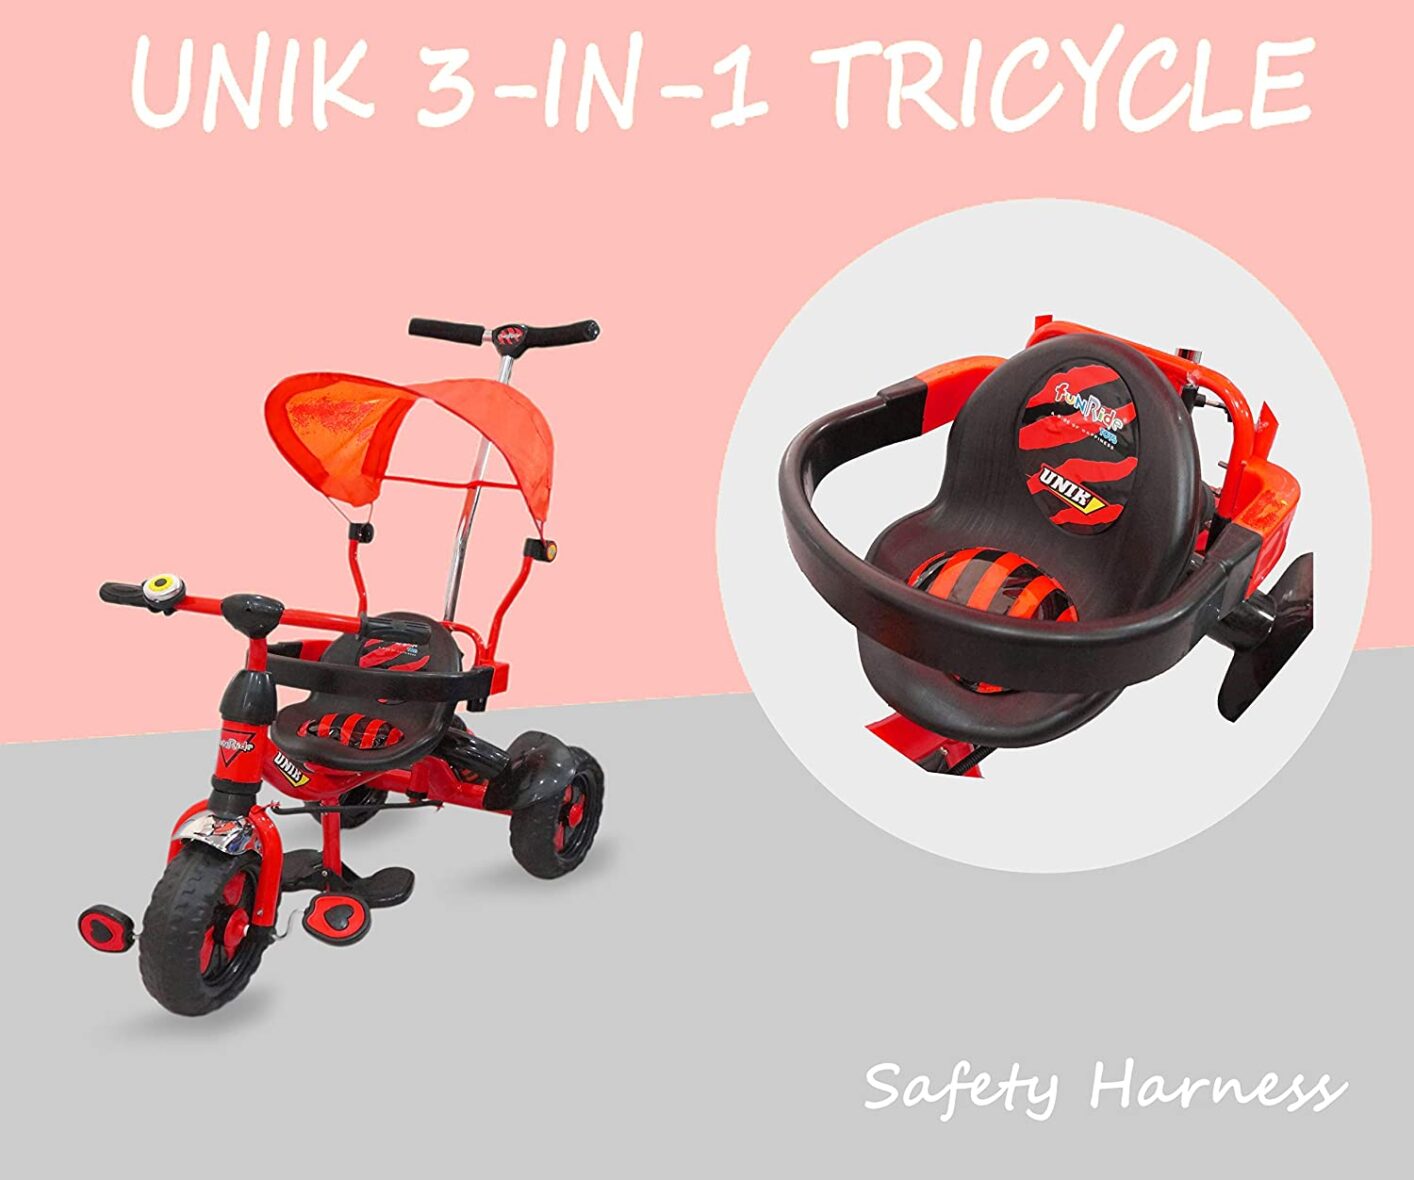 Fun Ride Baby Tricycle Unik Deluxe Rider 1 to 4 Years (13)